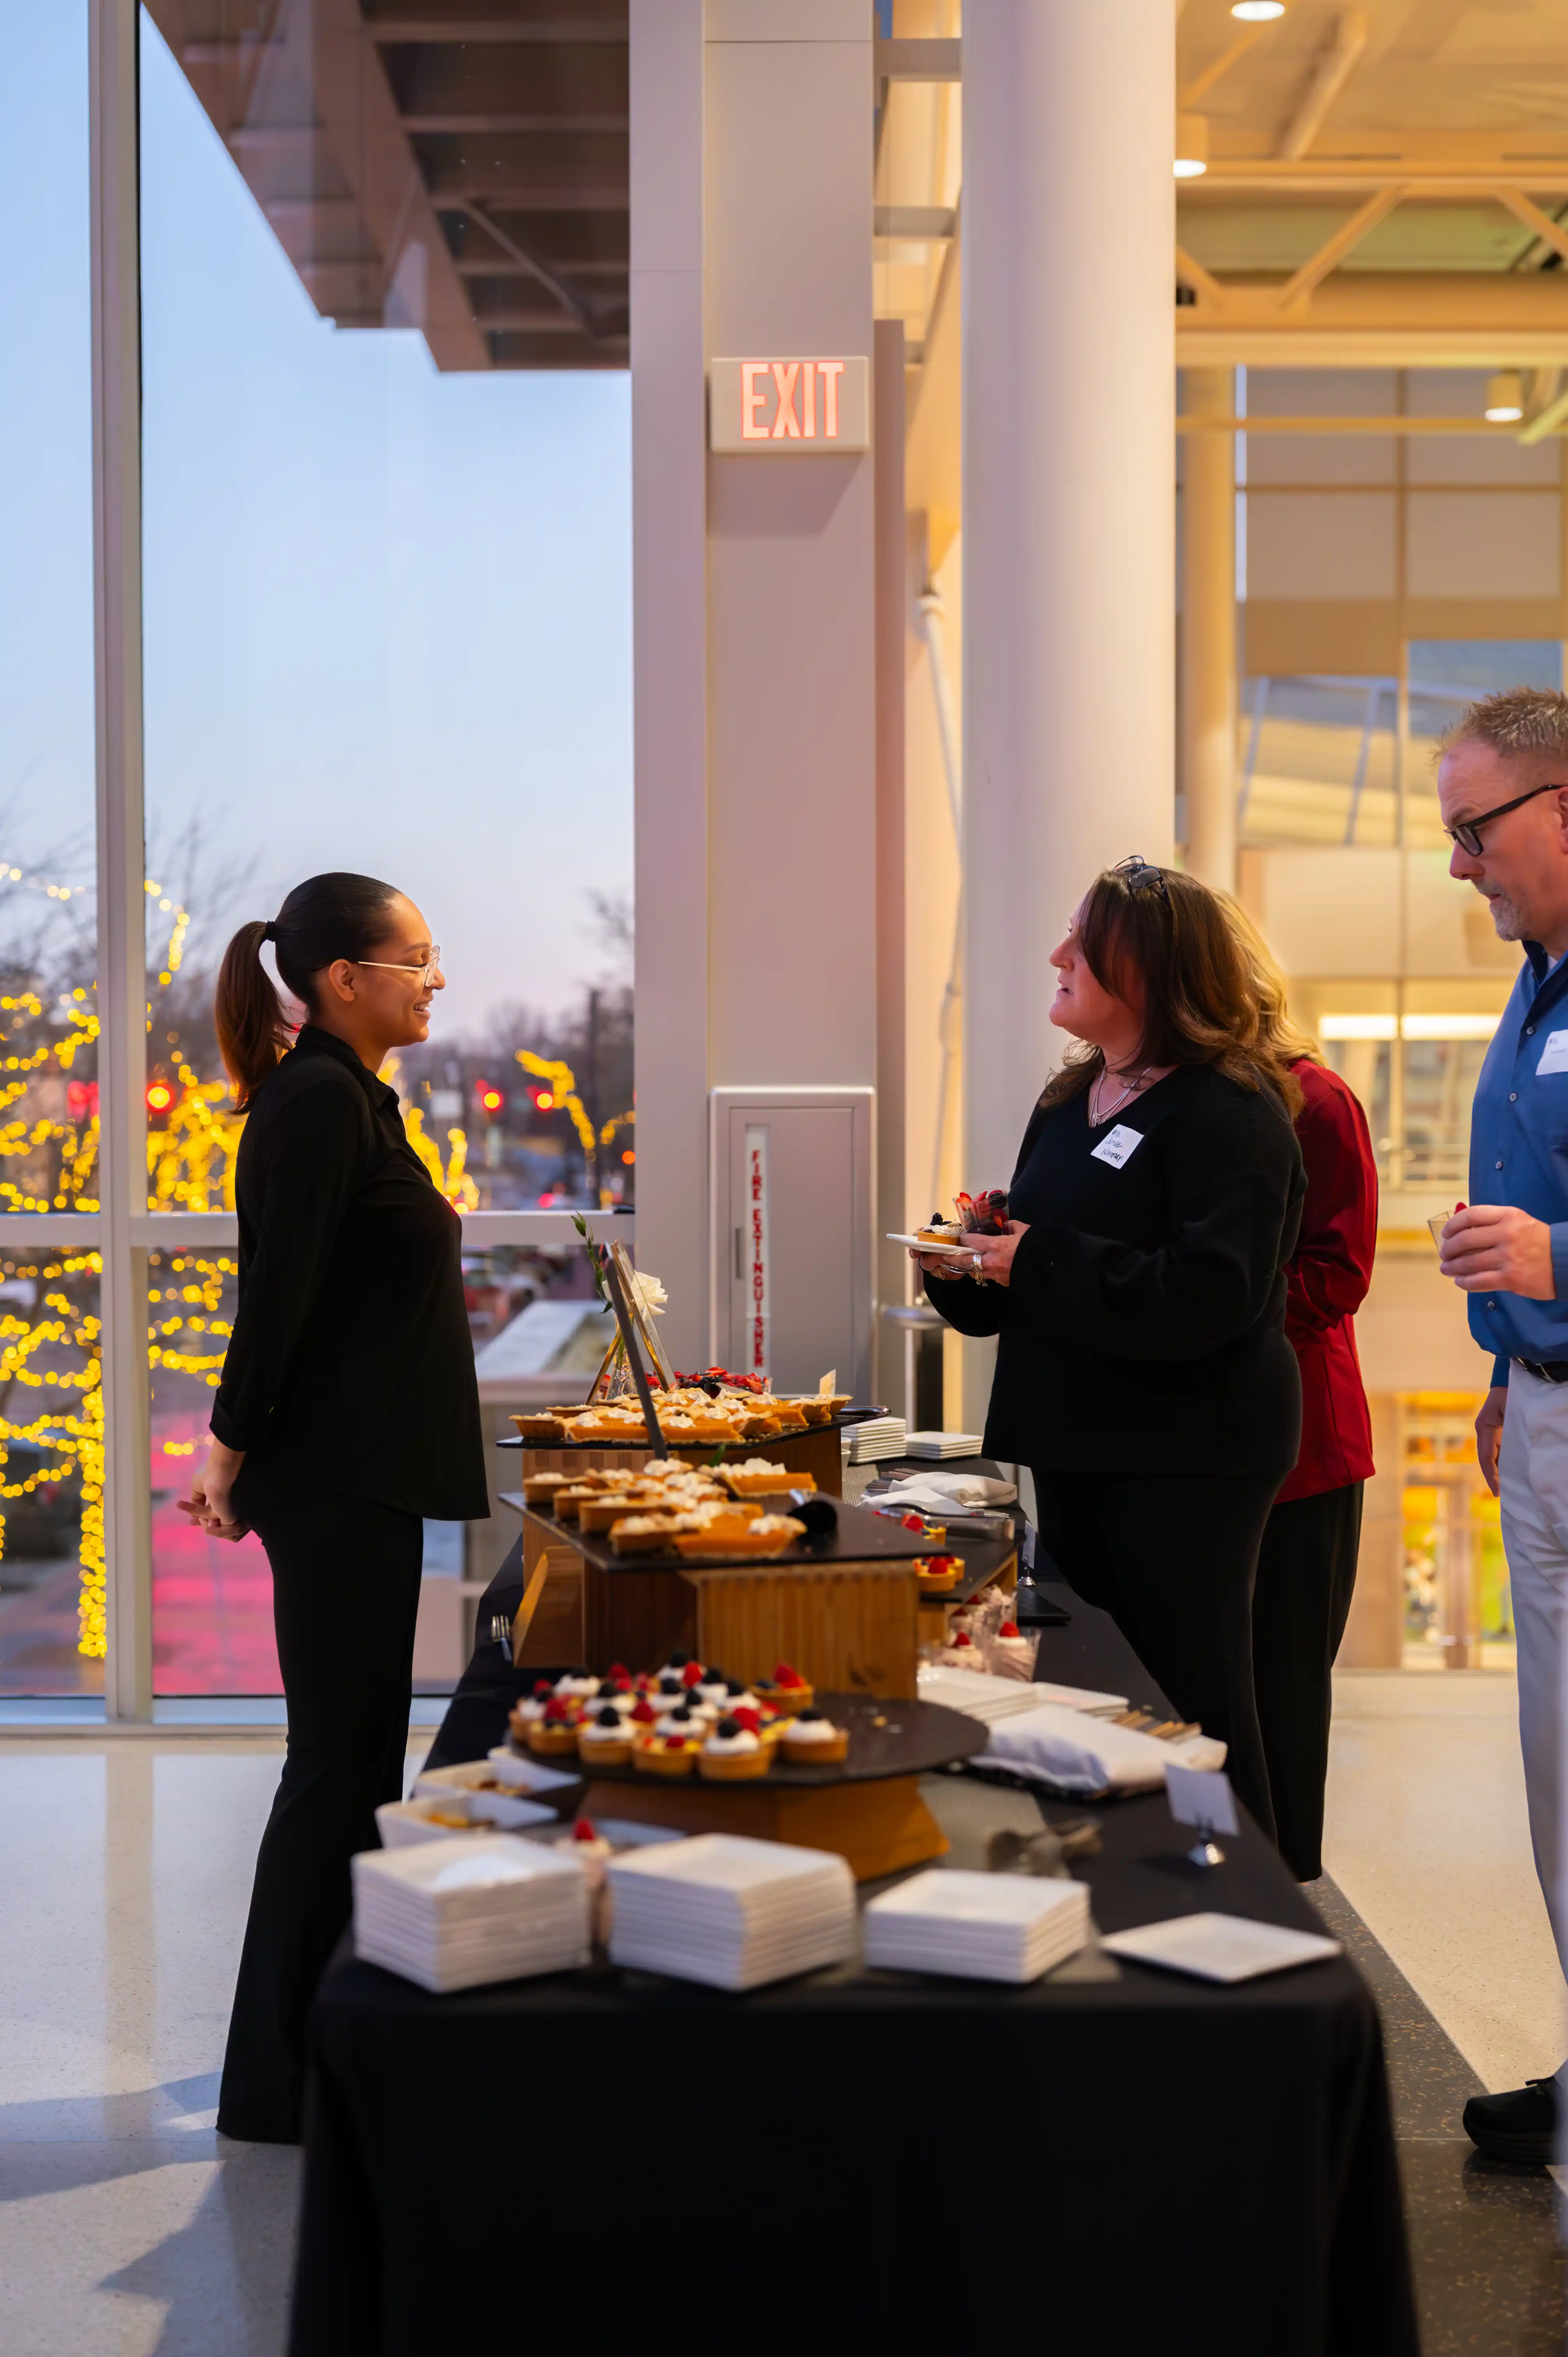 Two individuals conversing near a food table at an indoor event with windows showing a cityscape at dusk in the background.